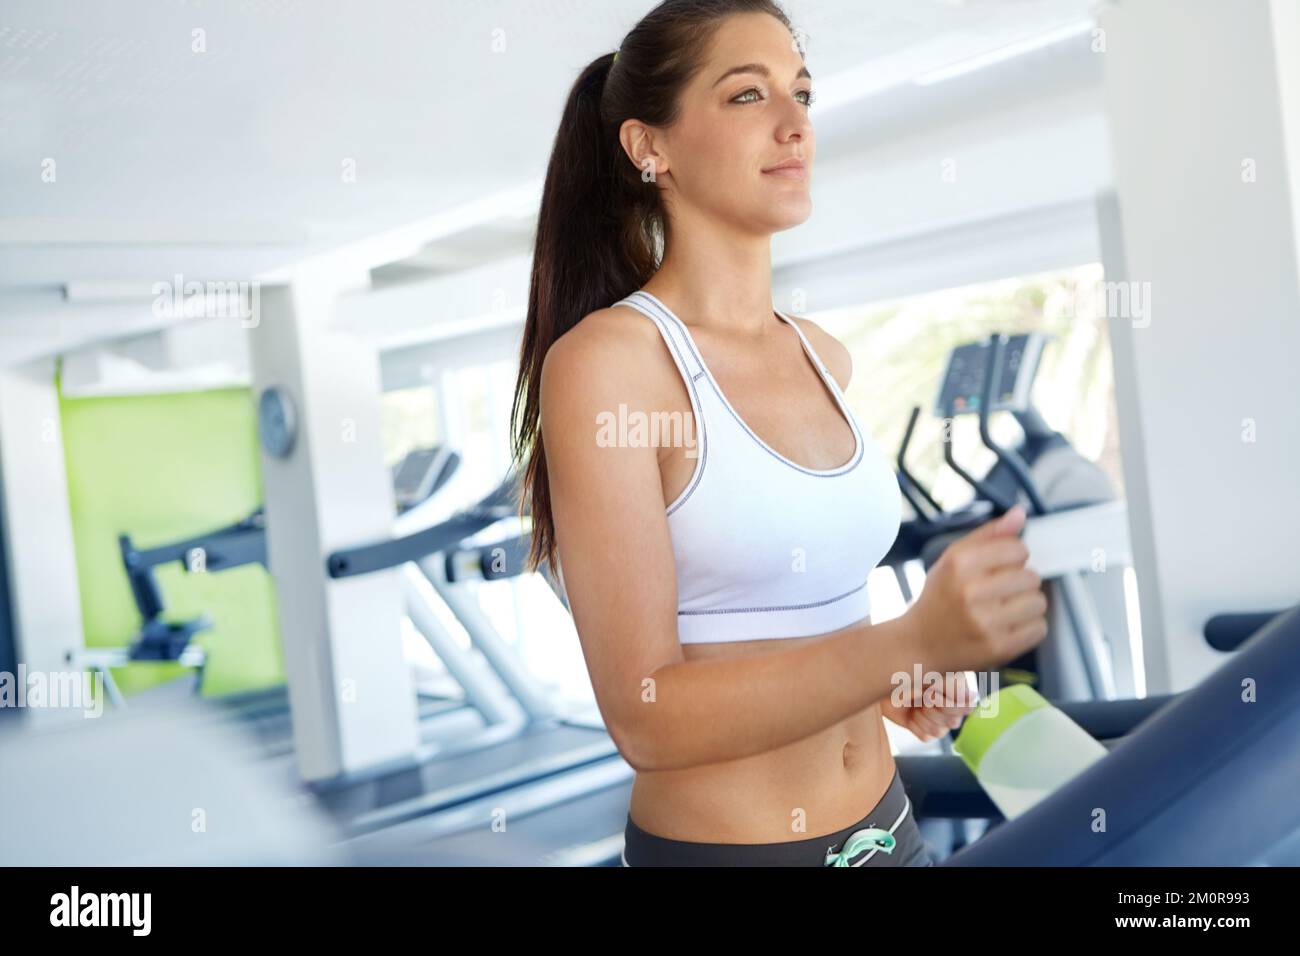 The Girl Gym In The Park. Fitness In The Nature. Morning Exercise With  Beautiful, Sport Woman. Stock Photo, Picture and Royalty Free Image. Image  119242939.